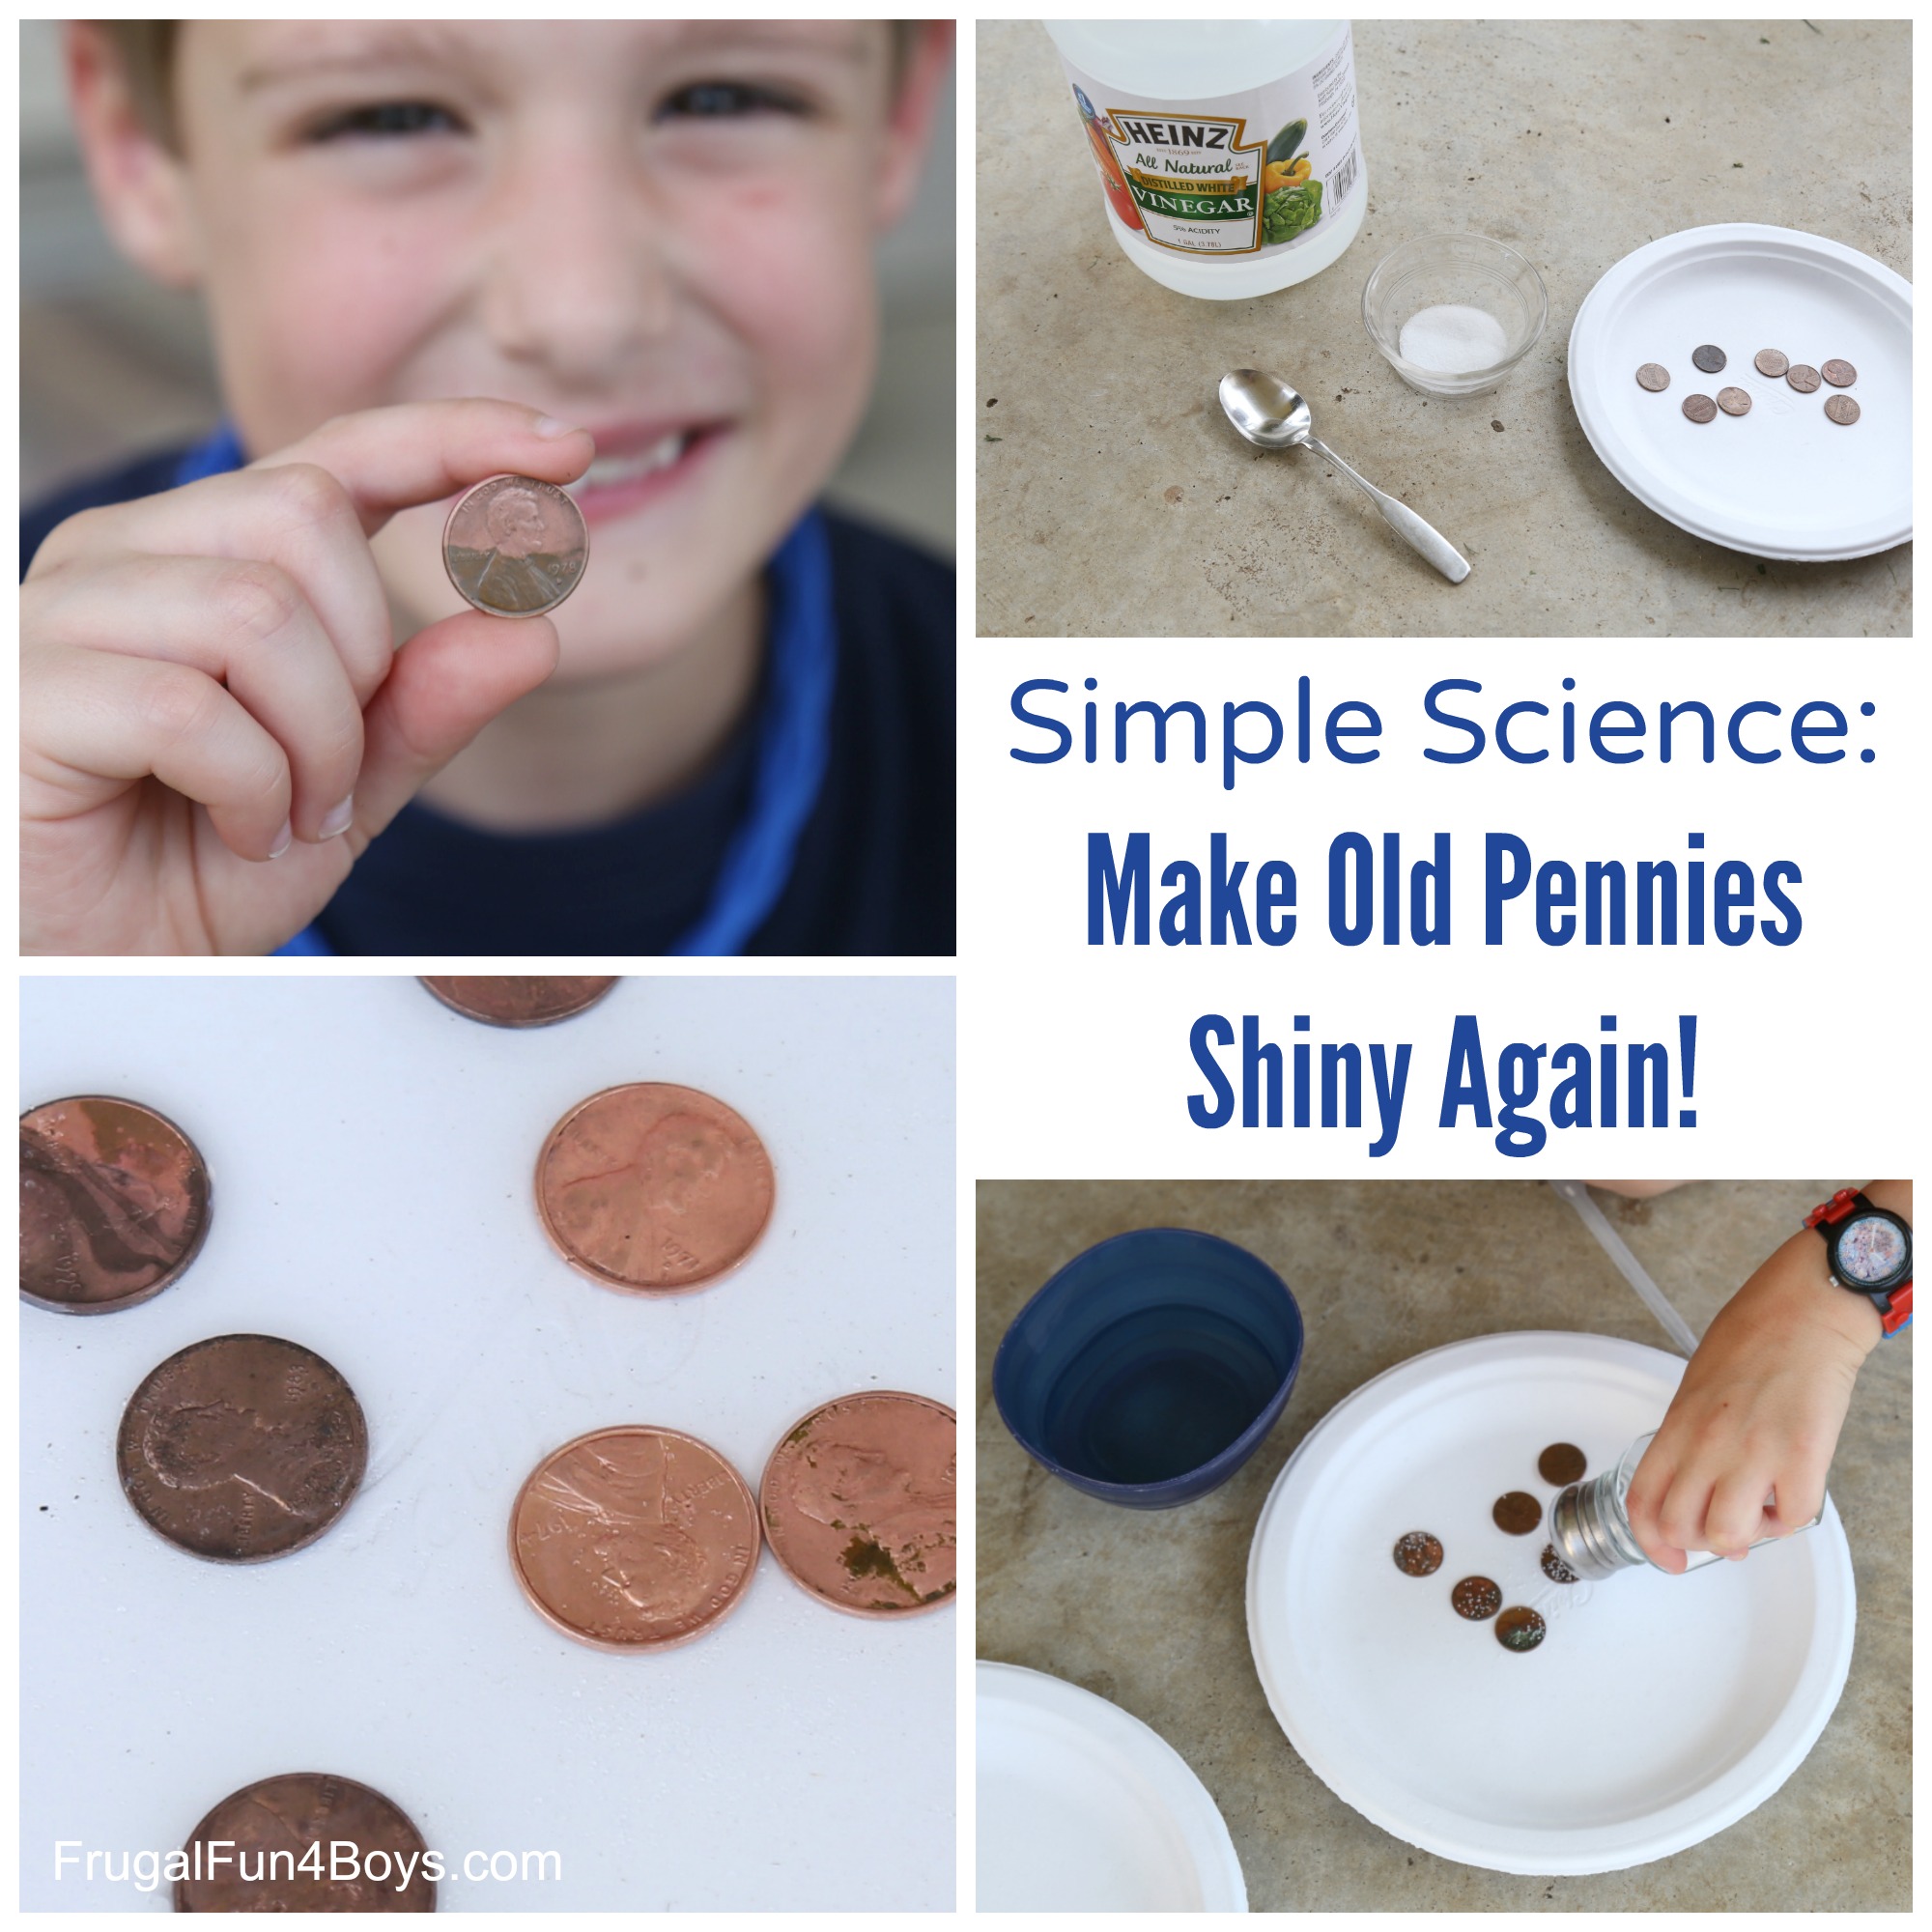 Simple Science: Make Old Pennies Shiny Again!